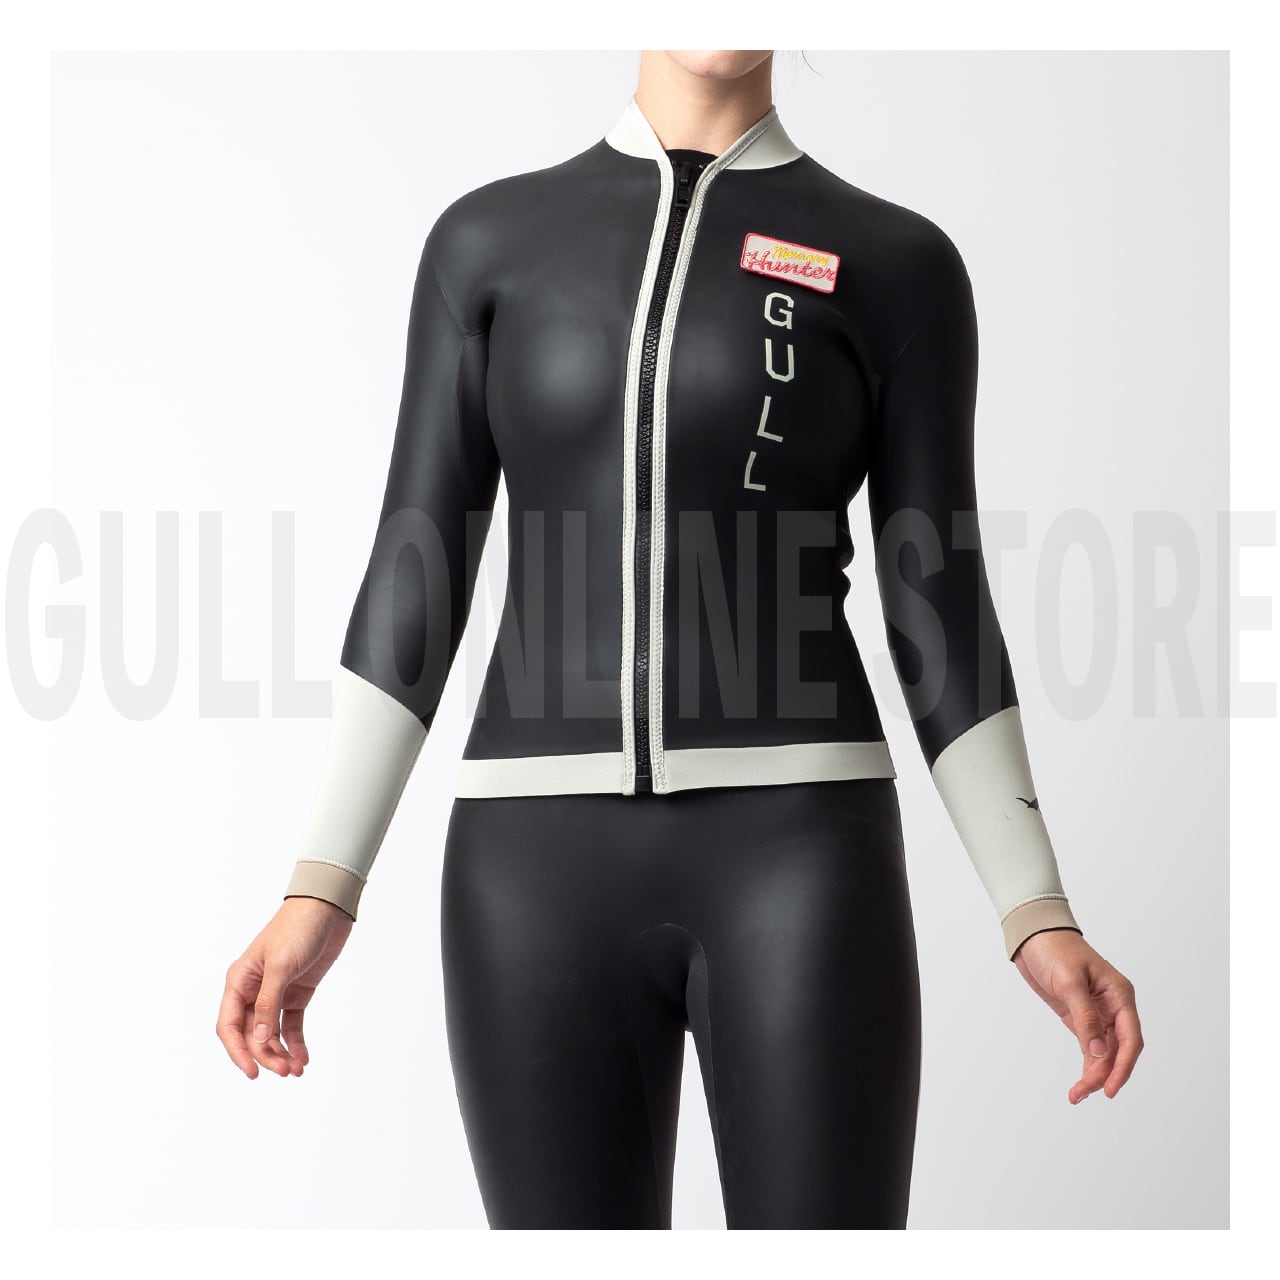 divecica Woman 3mm Wetsuits Jacket Long Sleeve Neoprene Wetsuits Top 